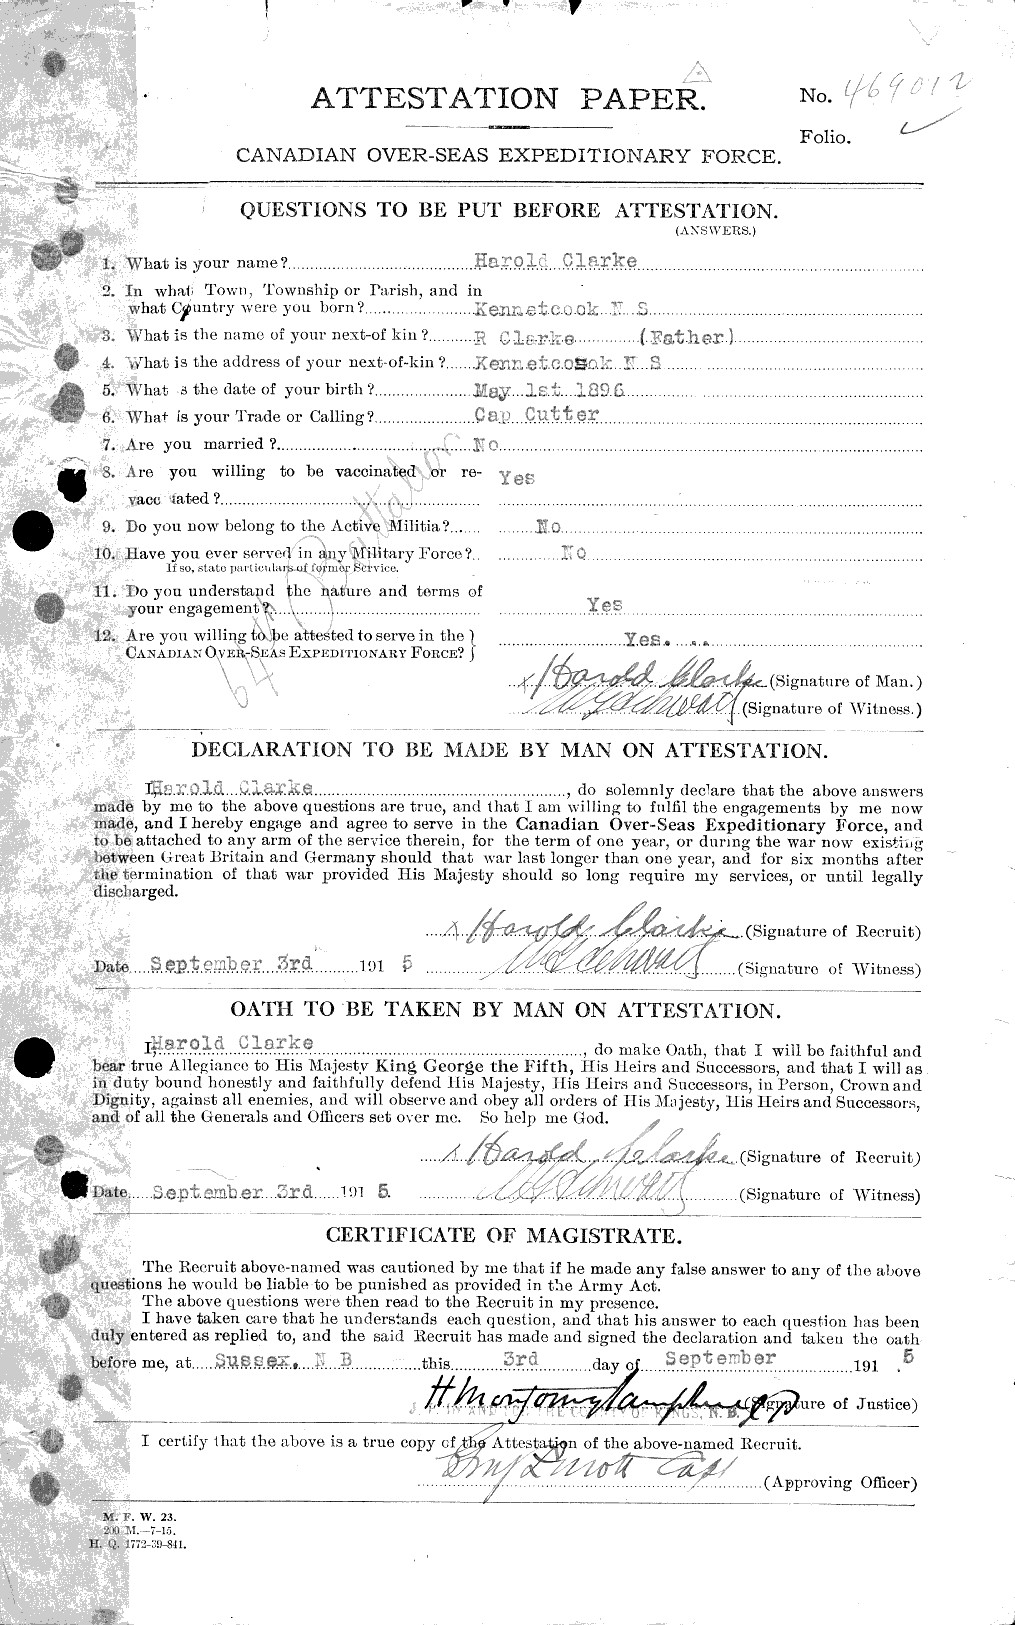 Personnel Records of the First World War - CEF 024332a